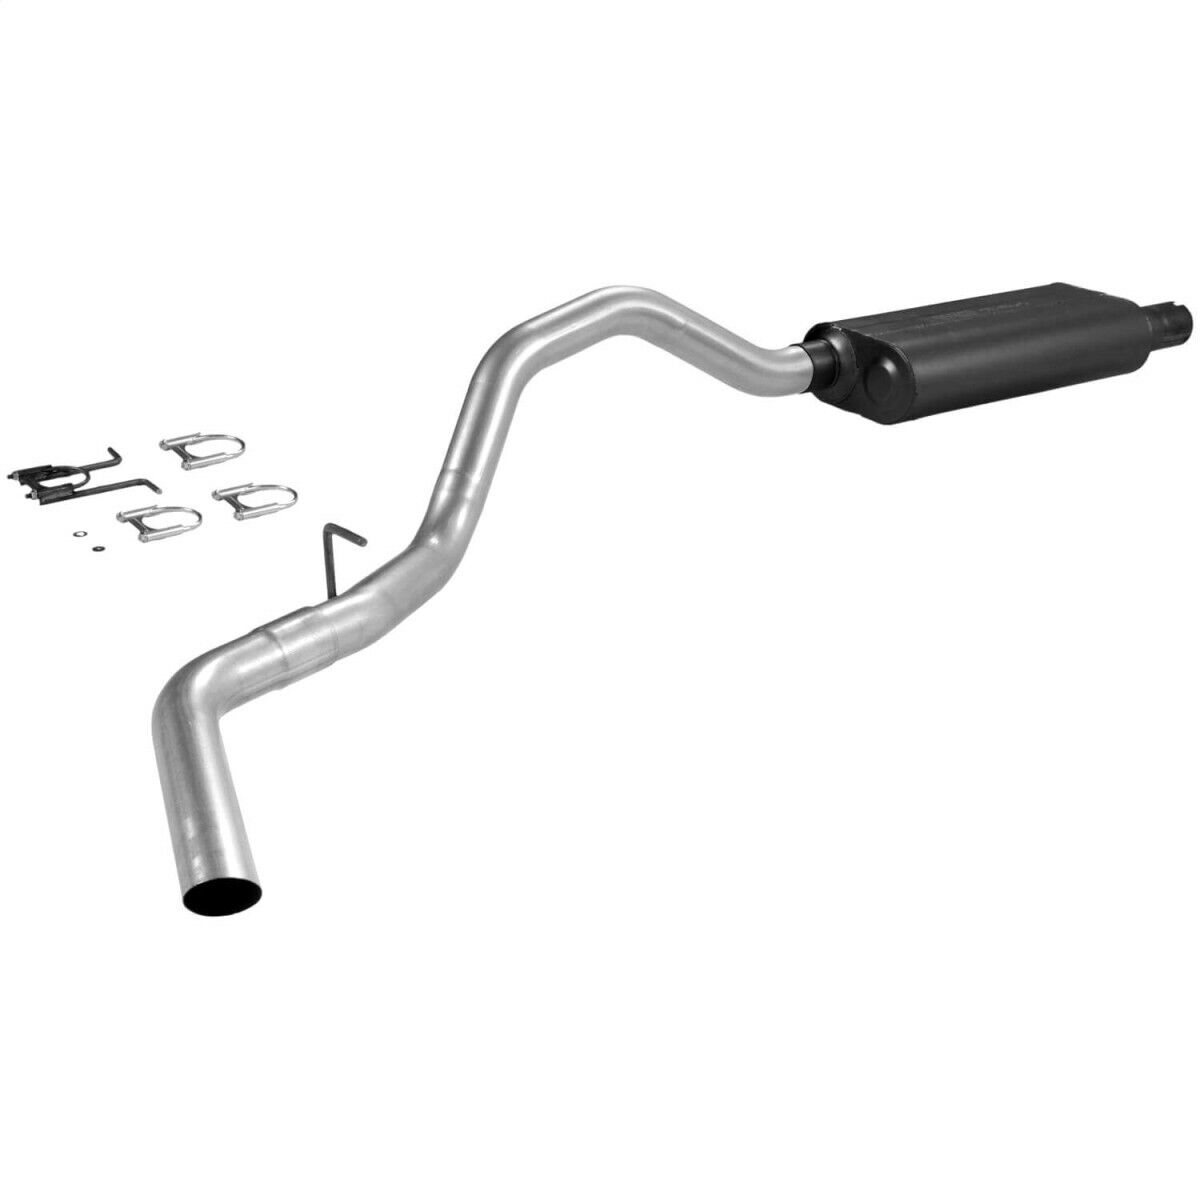 17229 Flowmaster Exhaust System for F250 Truck F350 Ford F-250 Super Duty F-350